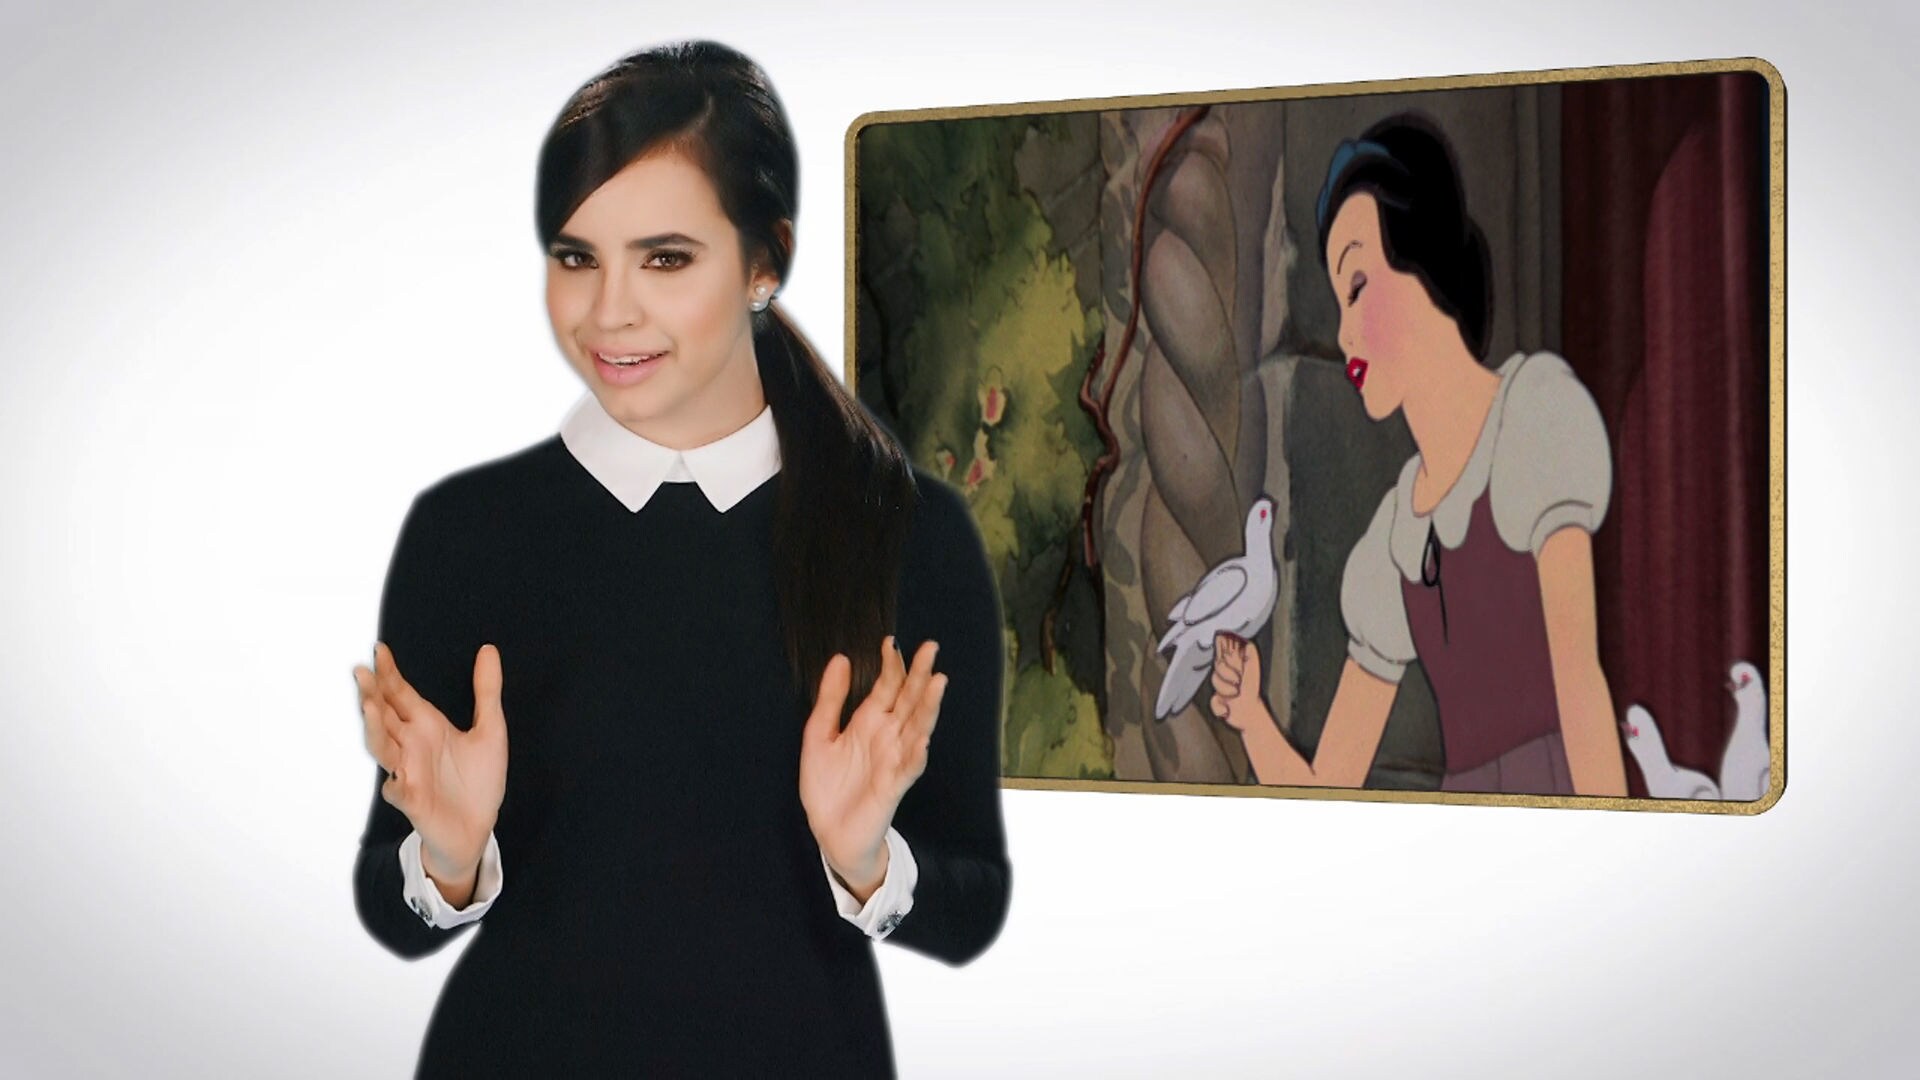 Snow White and the Seven Dwarfs Fun Facts